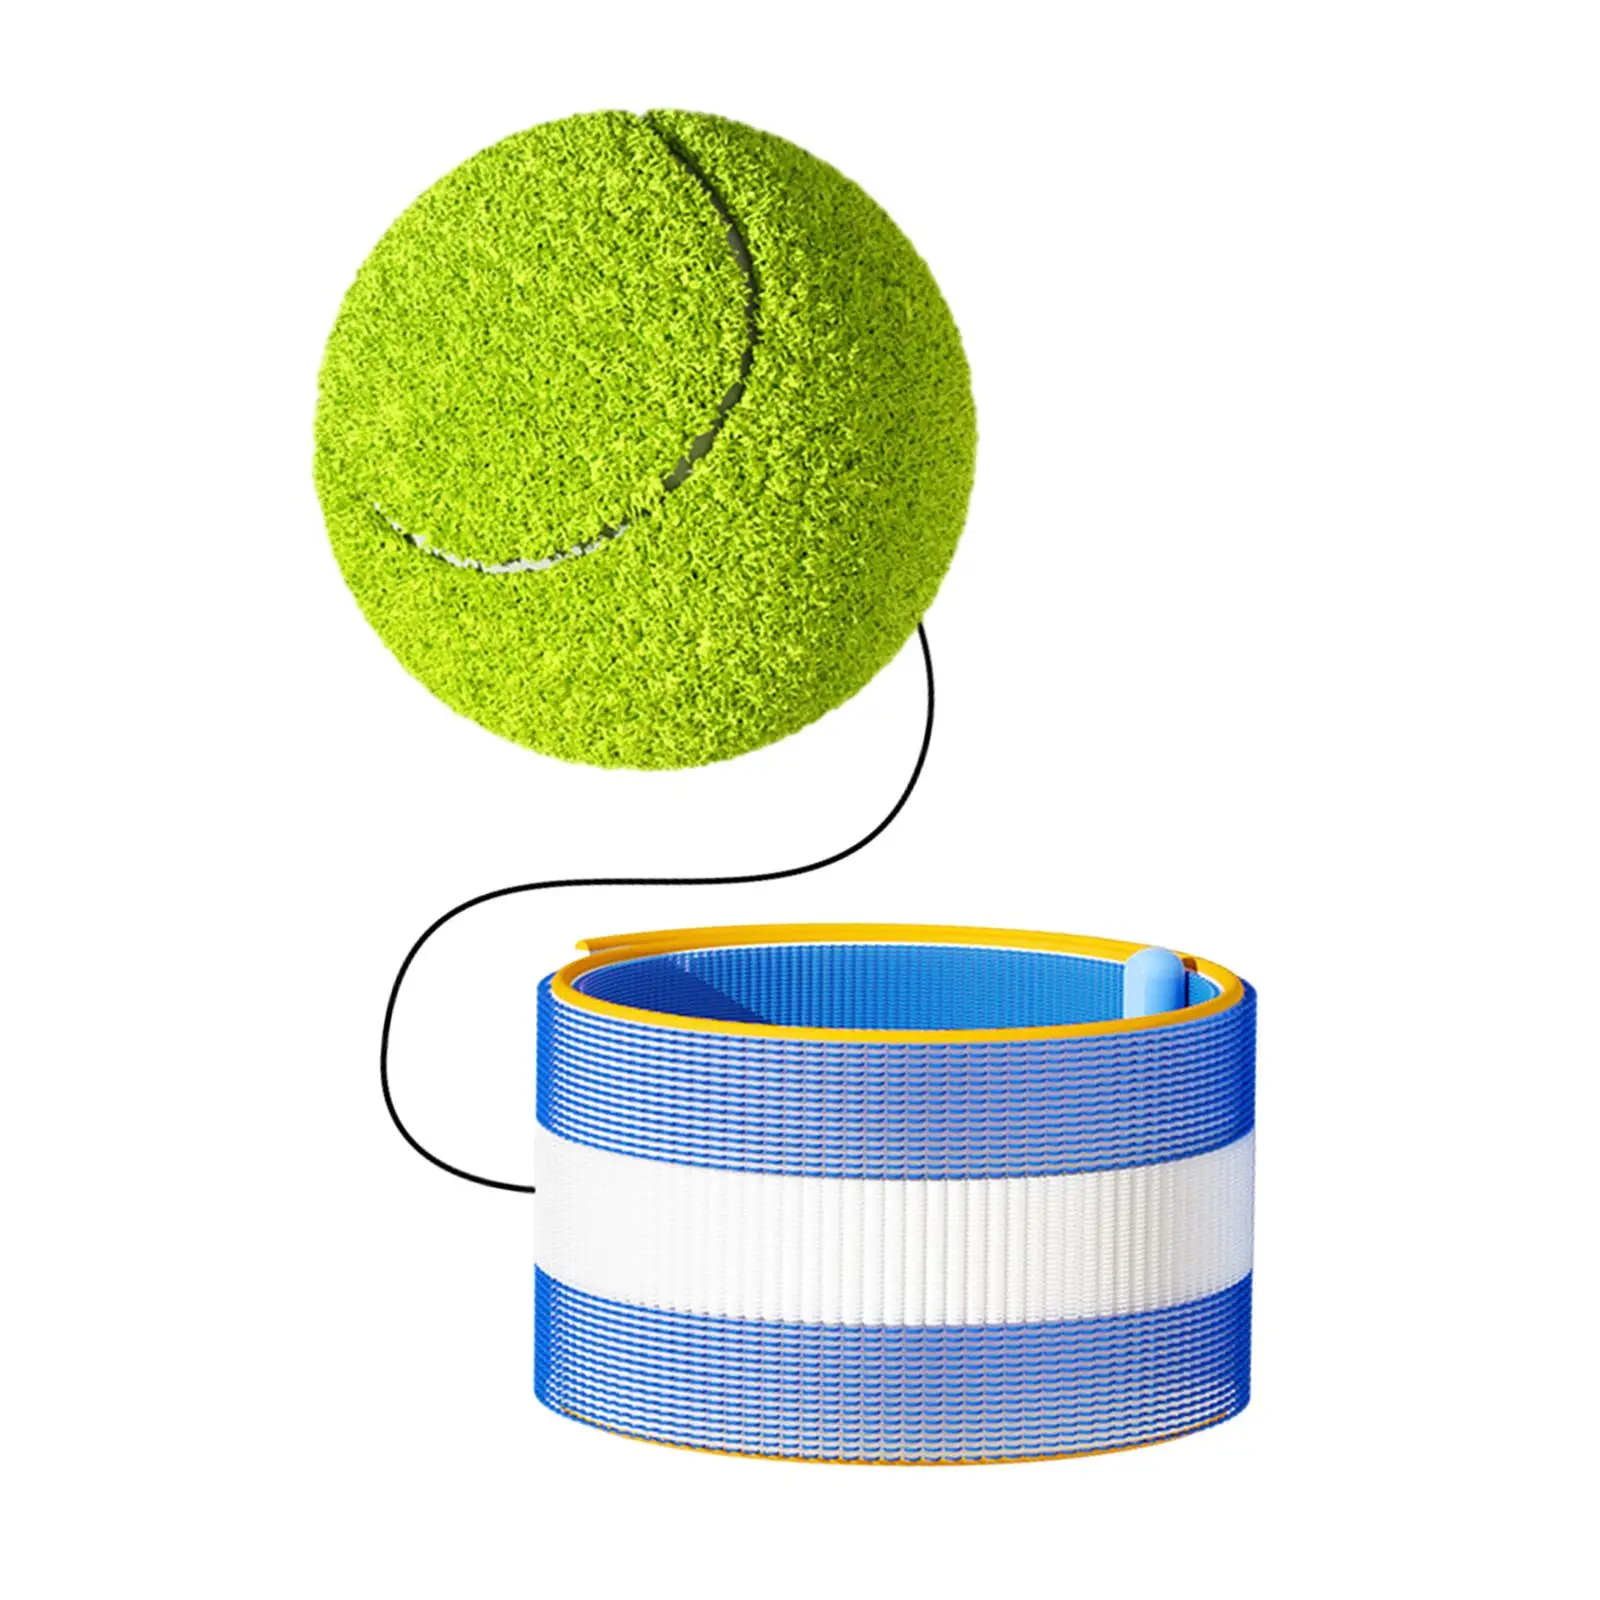 Wrist Return Ball Wrist Exercise Sports 2.36inch Baseball Hand Eye Coordination Trainer Wrist Band Ball for Party Favor Toys